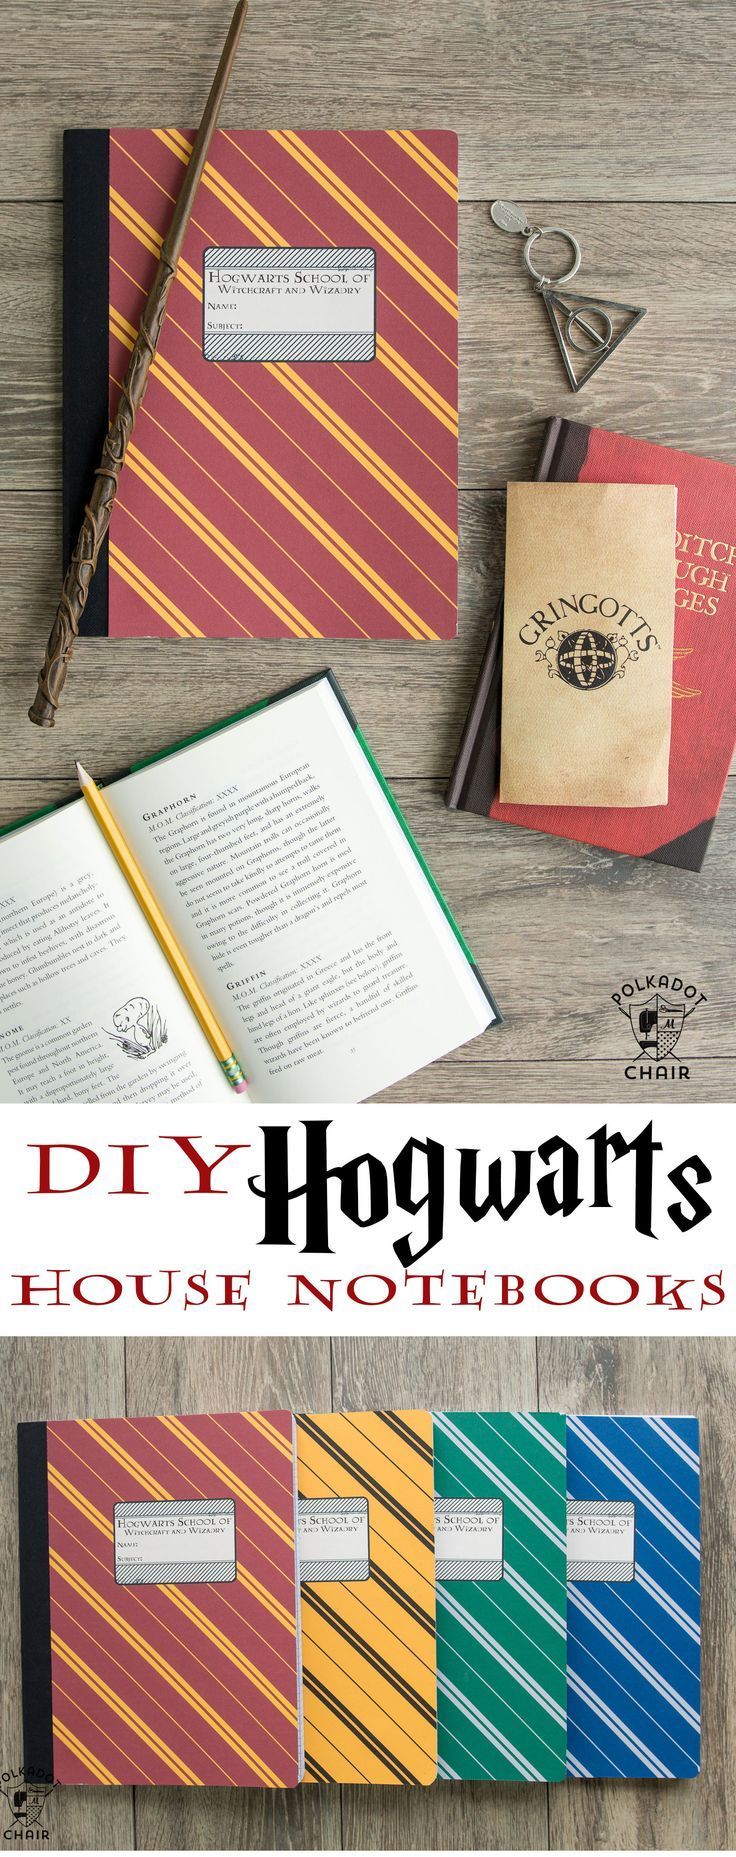 DIY Harry Potter Hogwarts Notebooks; with free printable covers for each house on http://polkadotchair.com